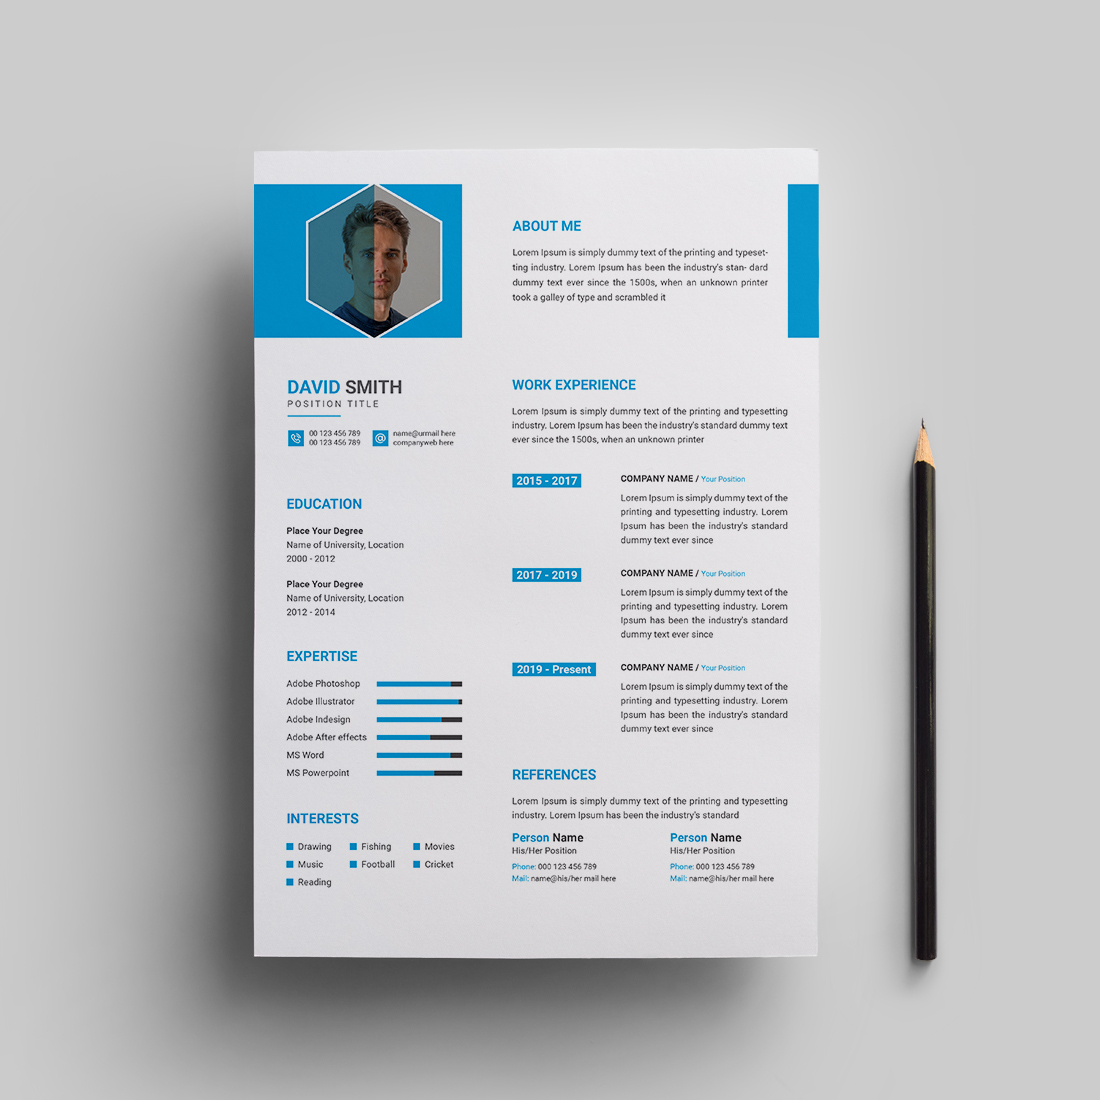 Resume design preview image.